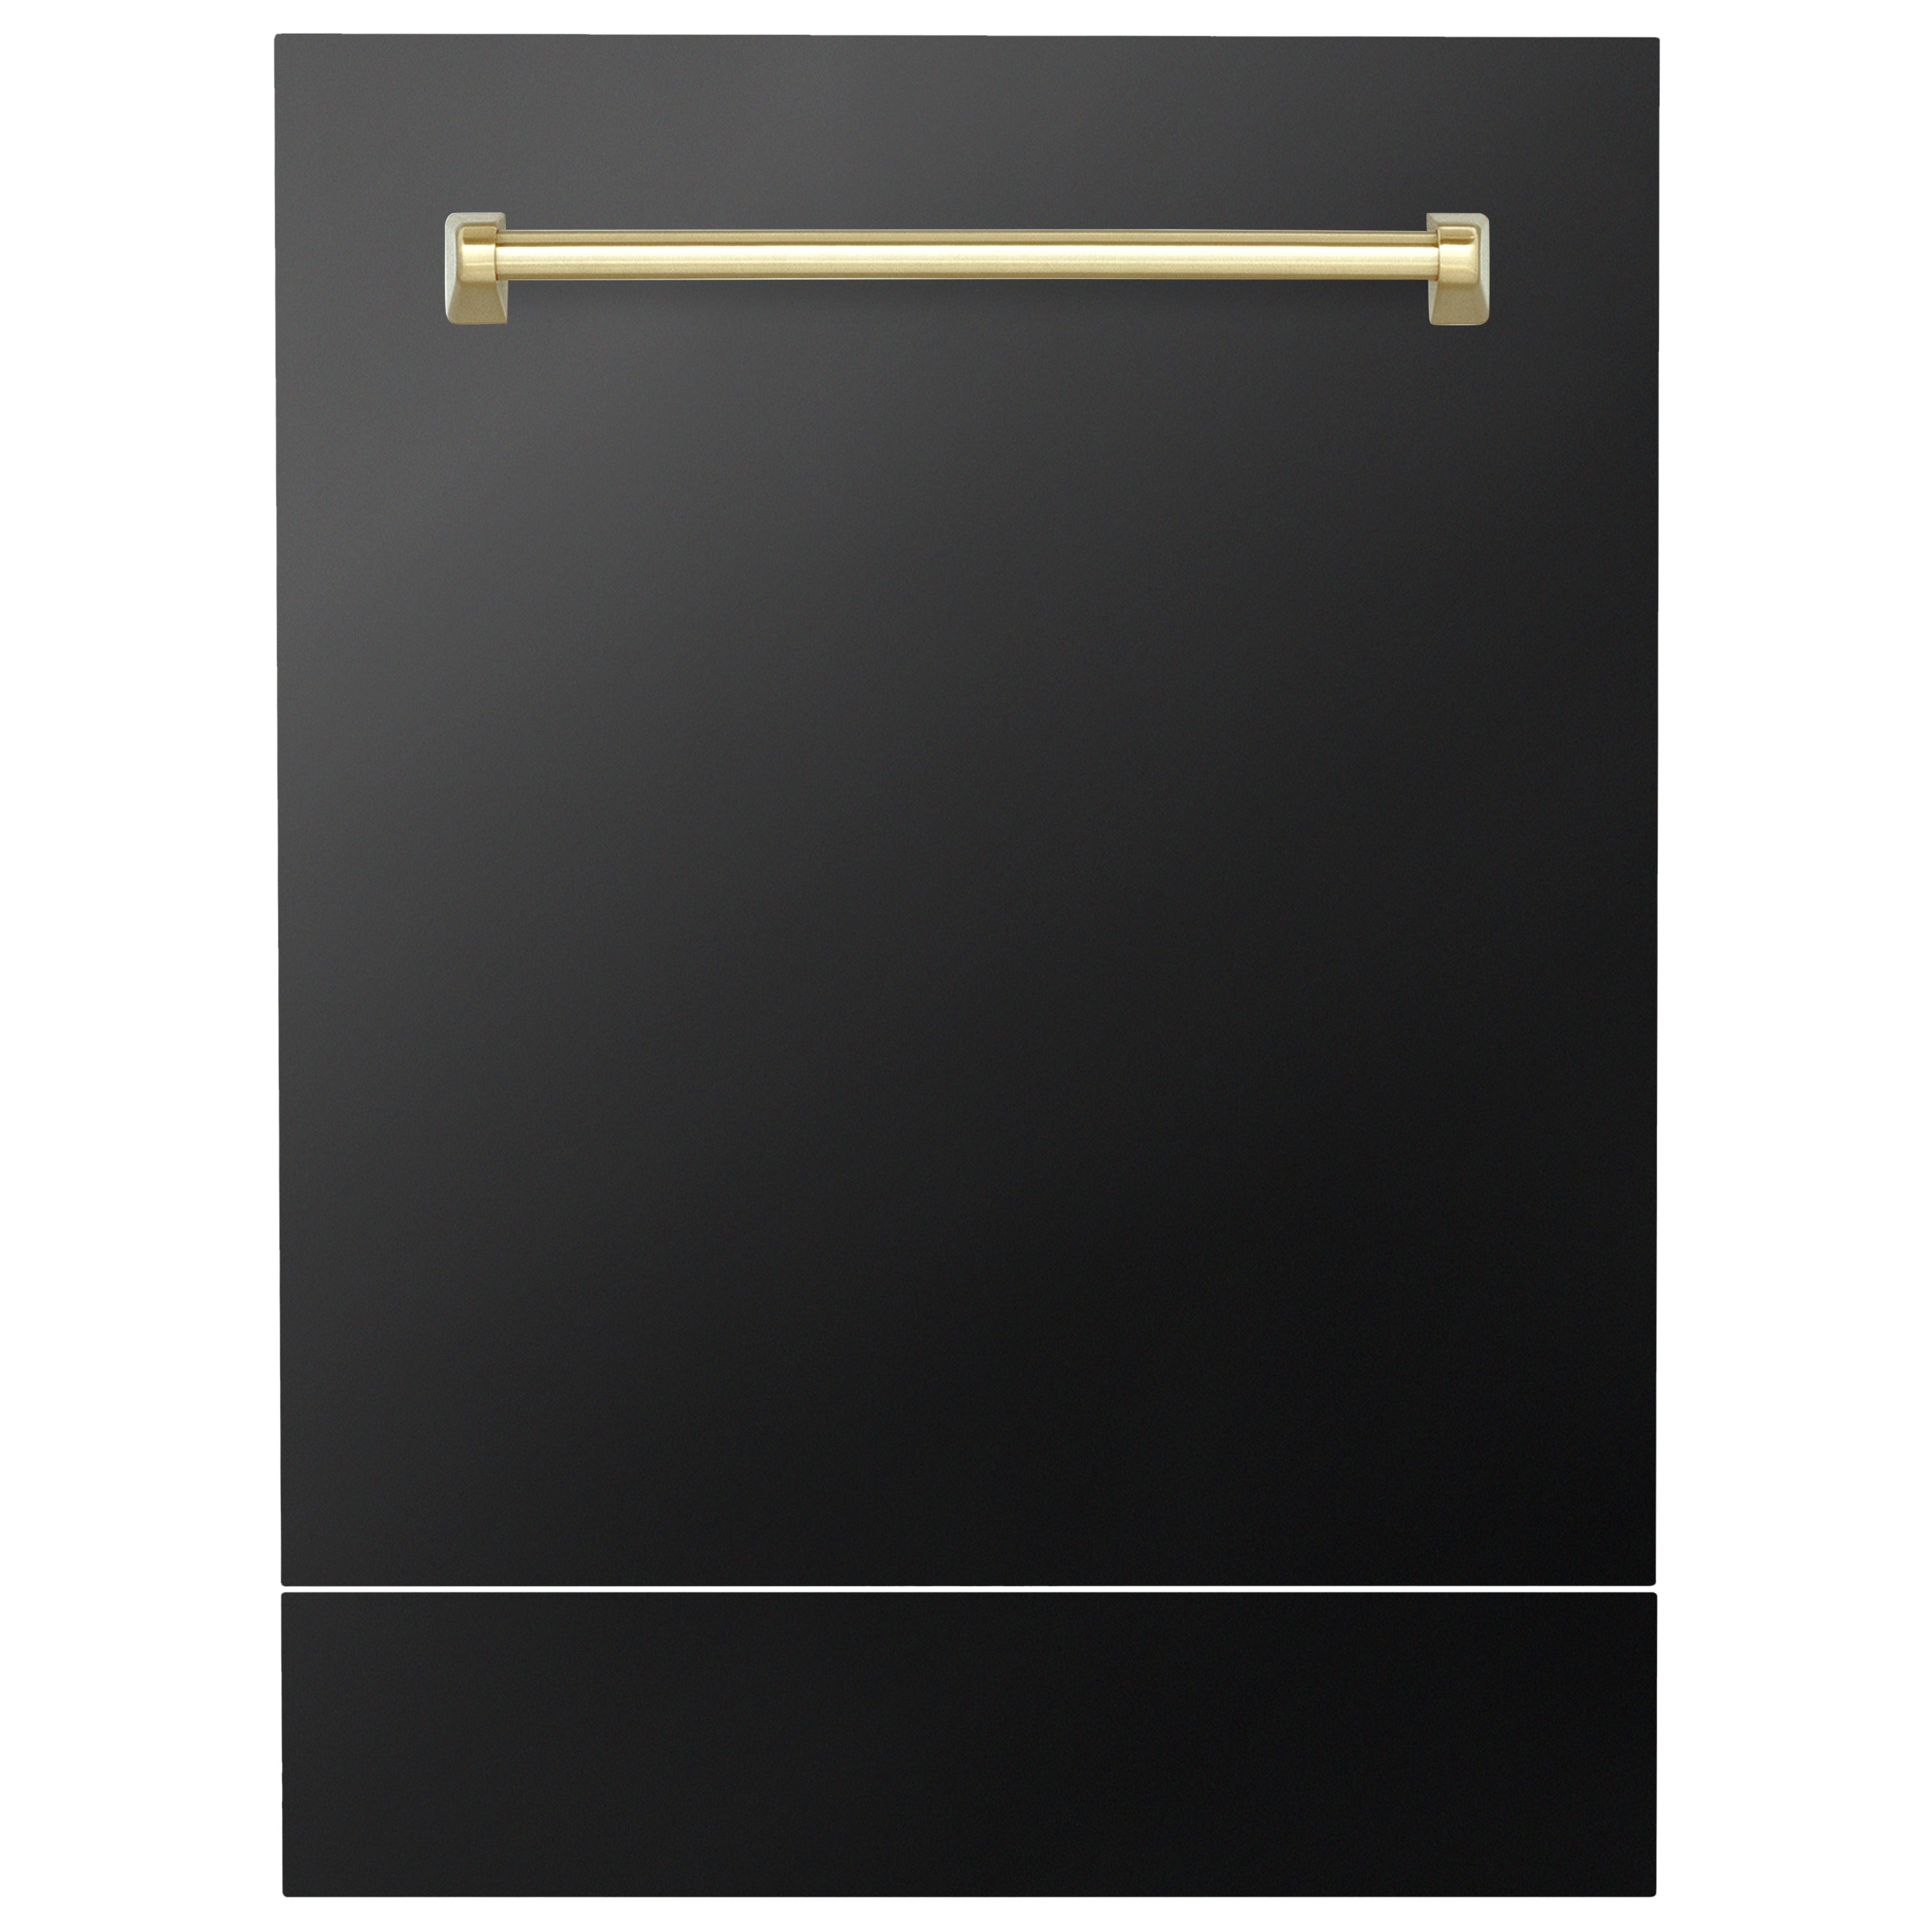 ZLINE 24" Autograph Edition Tallac Dishwasher Panel in Black Stainless Steel with Gold Handle (DPVZ-BS-24-G)